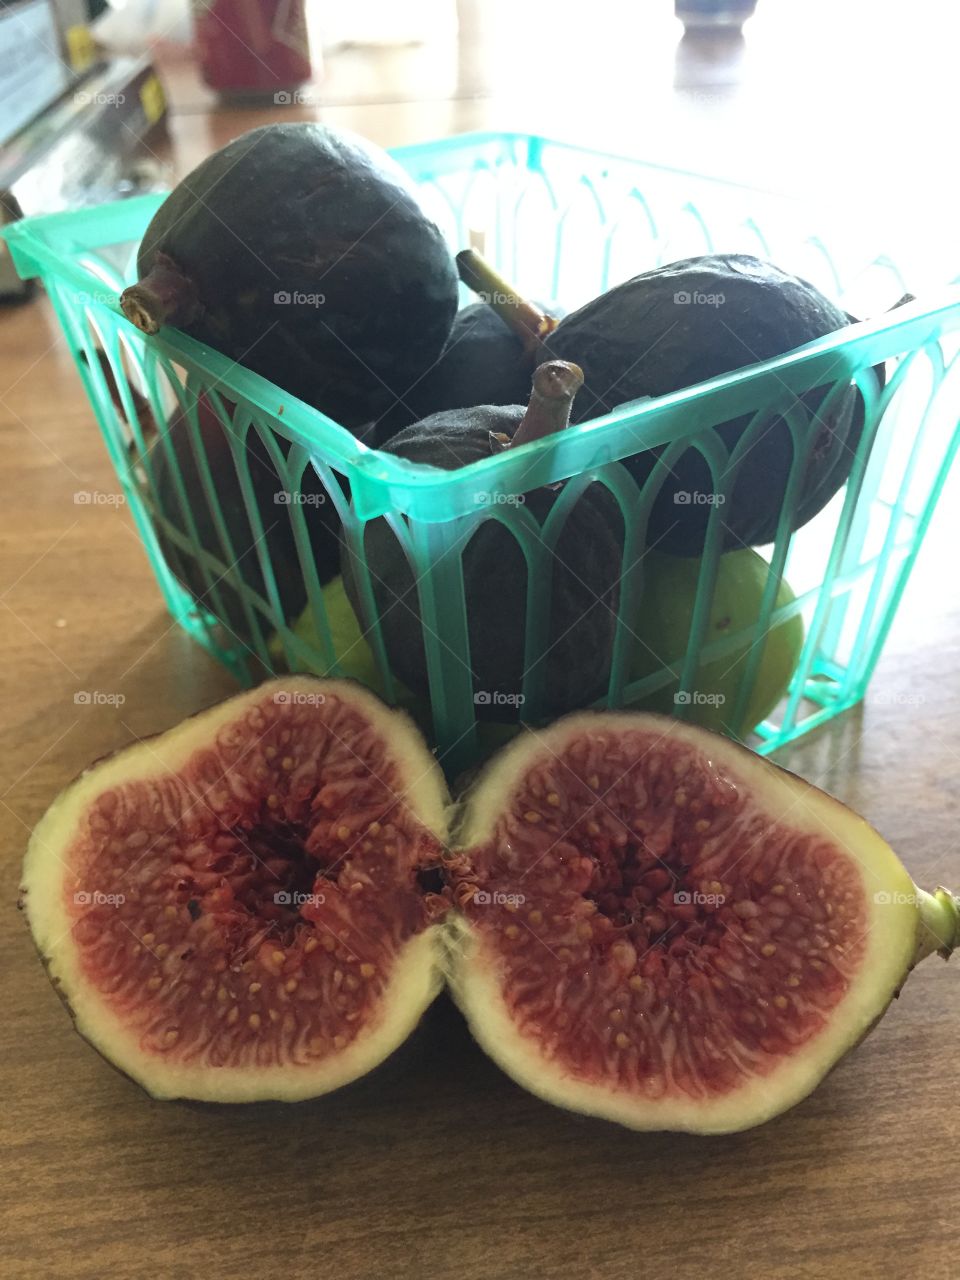 Fresh figs from farmers market. 3 varieties. So ripe and delicious.  Unfiltered picture. 